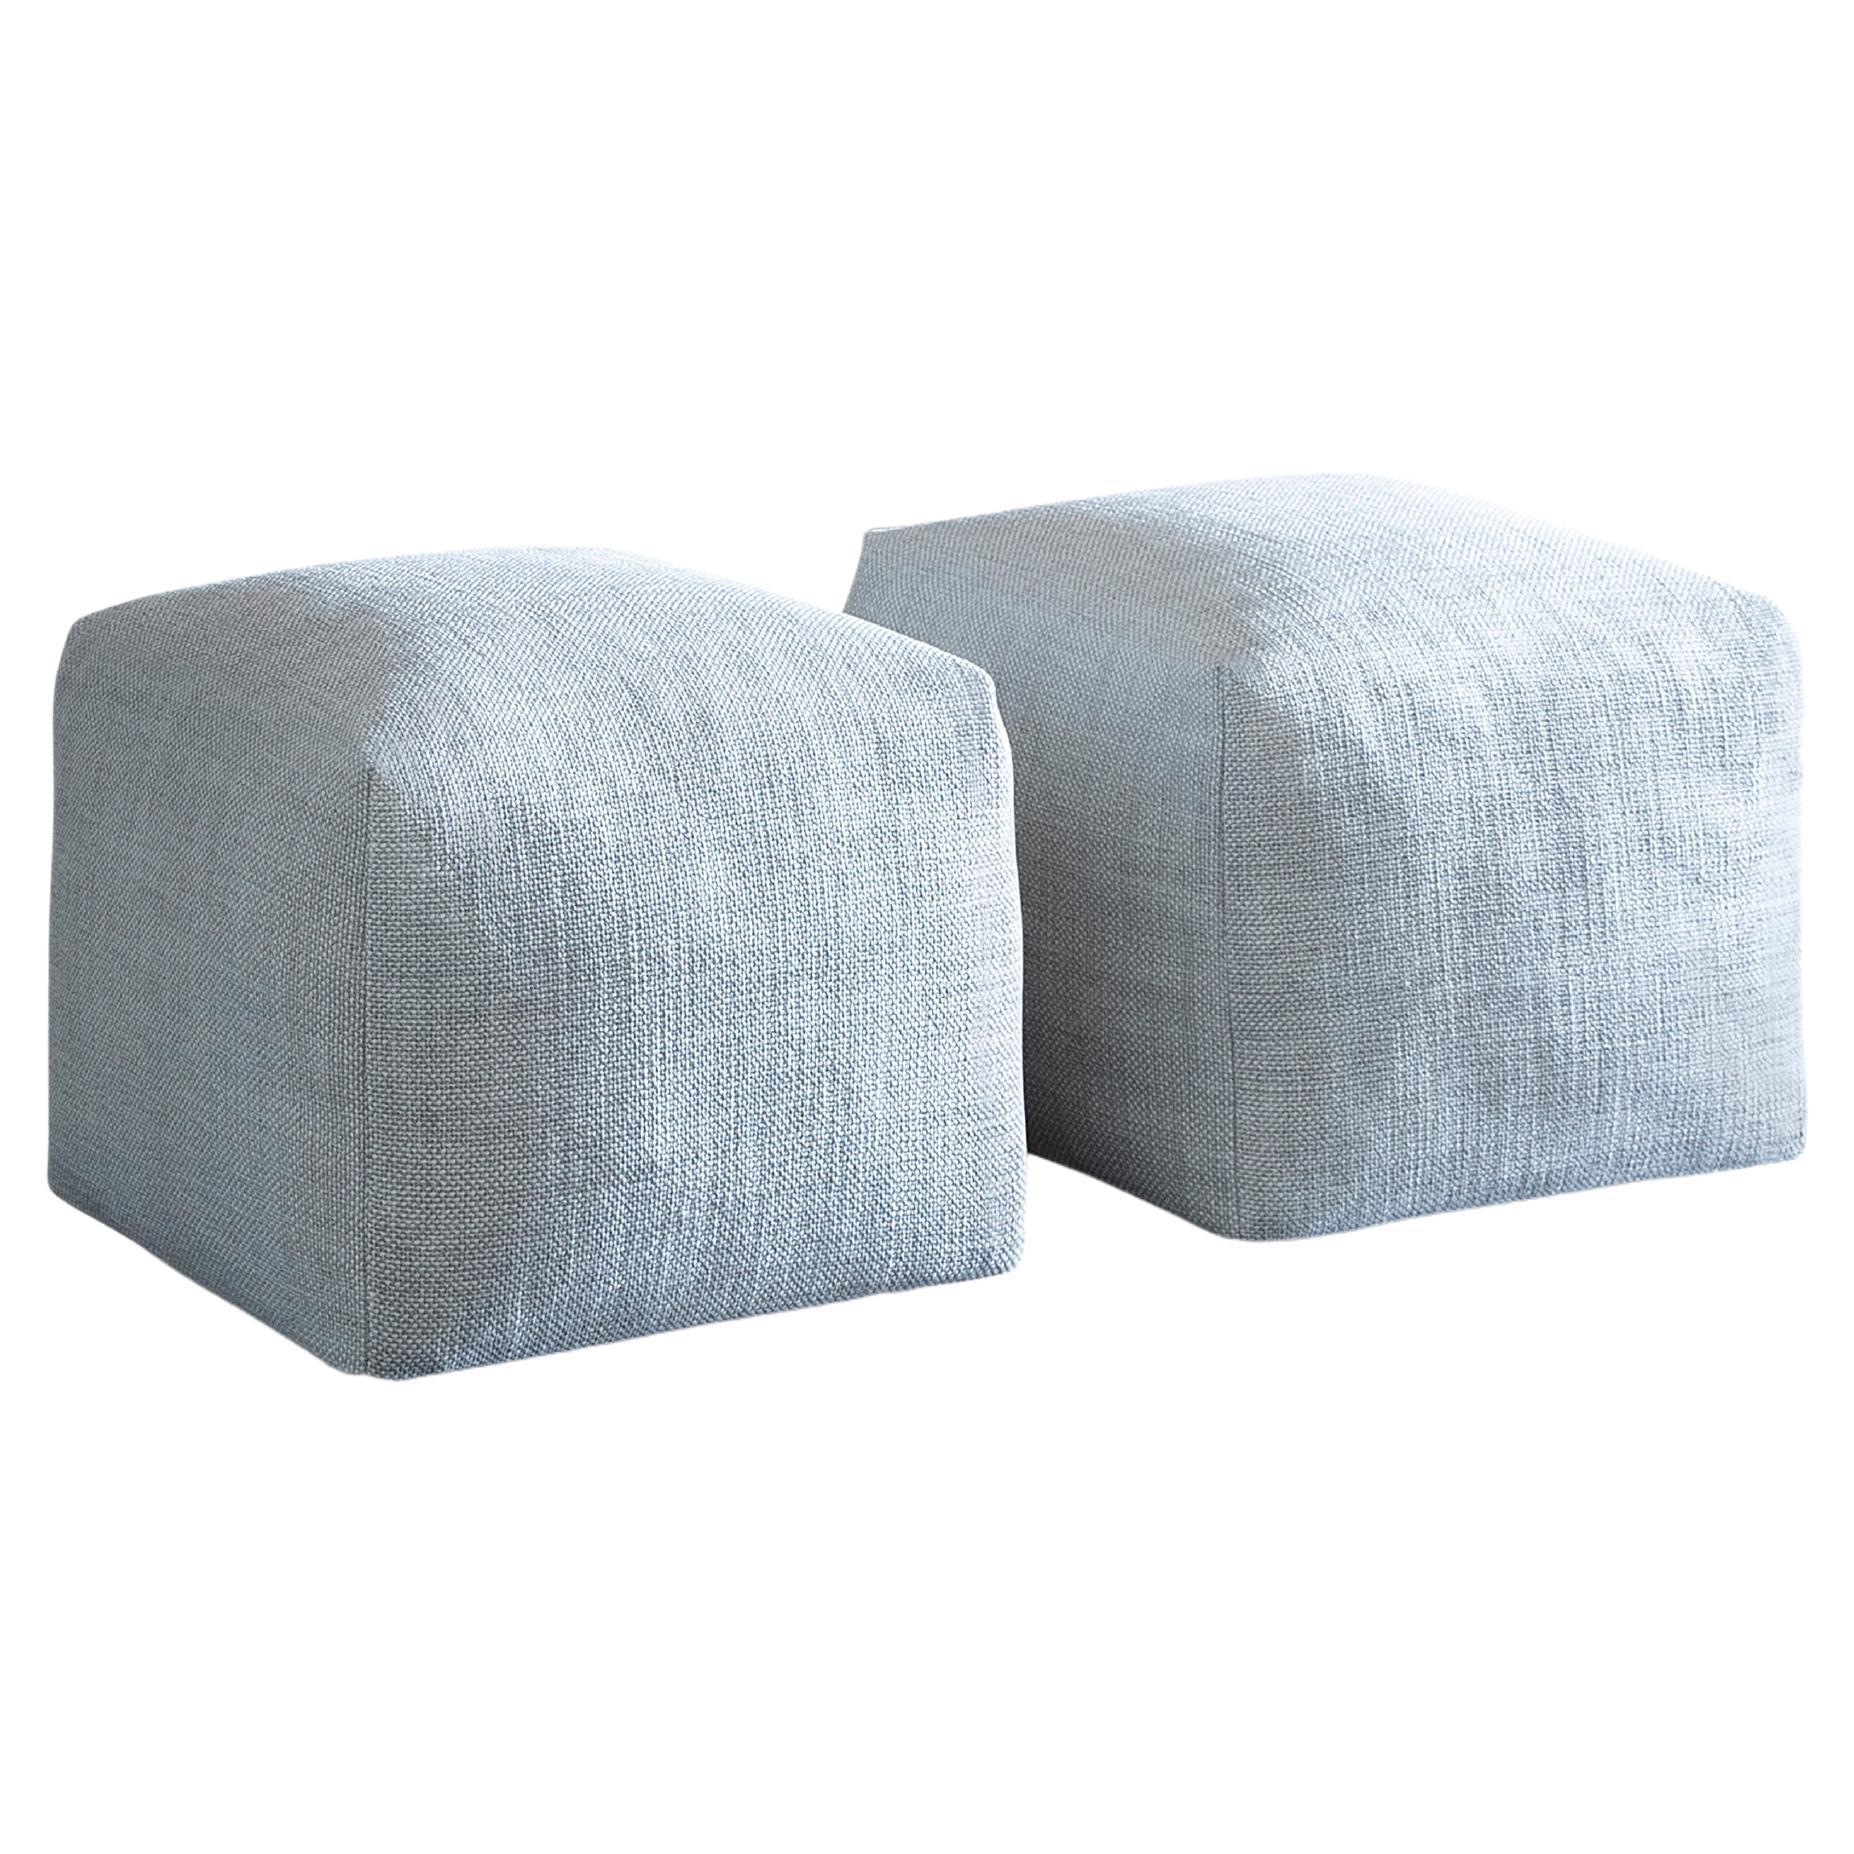 Pixel Pouf in Avant Après Grey Upholstery by Sergio Bicego